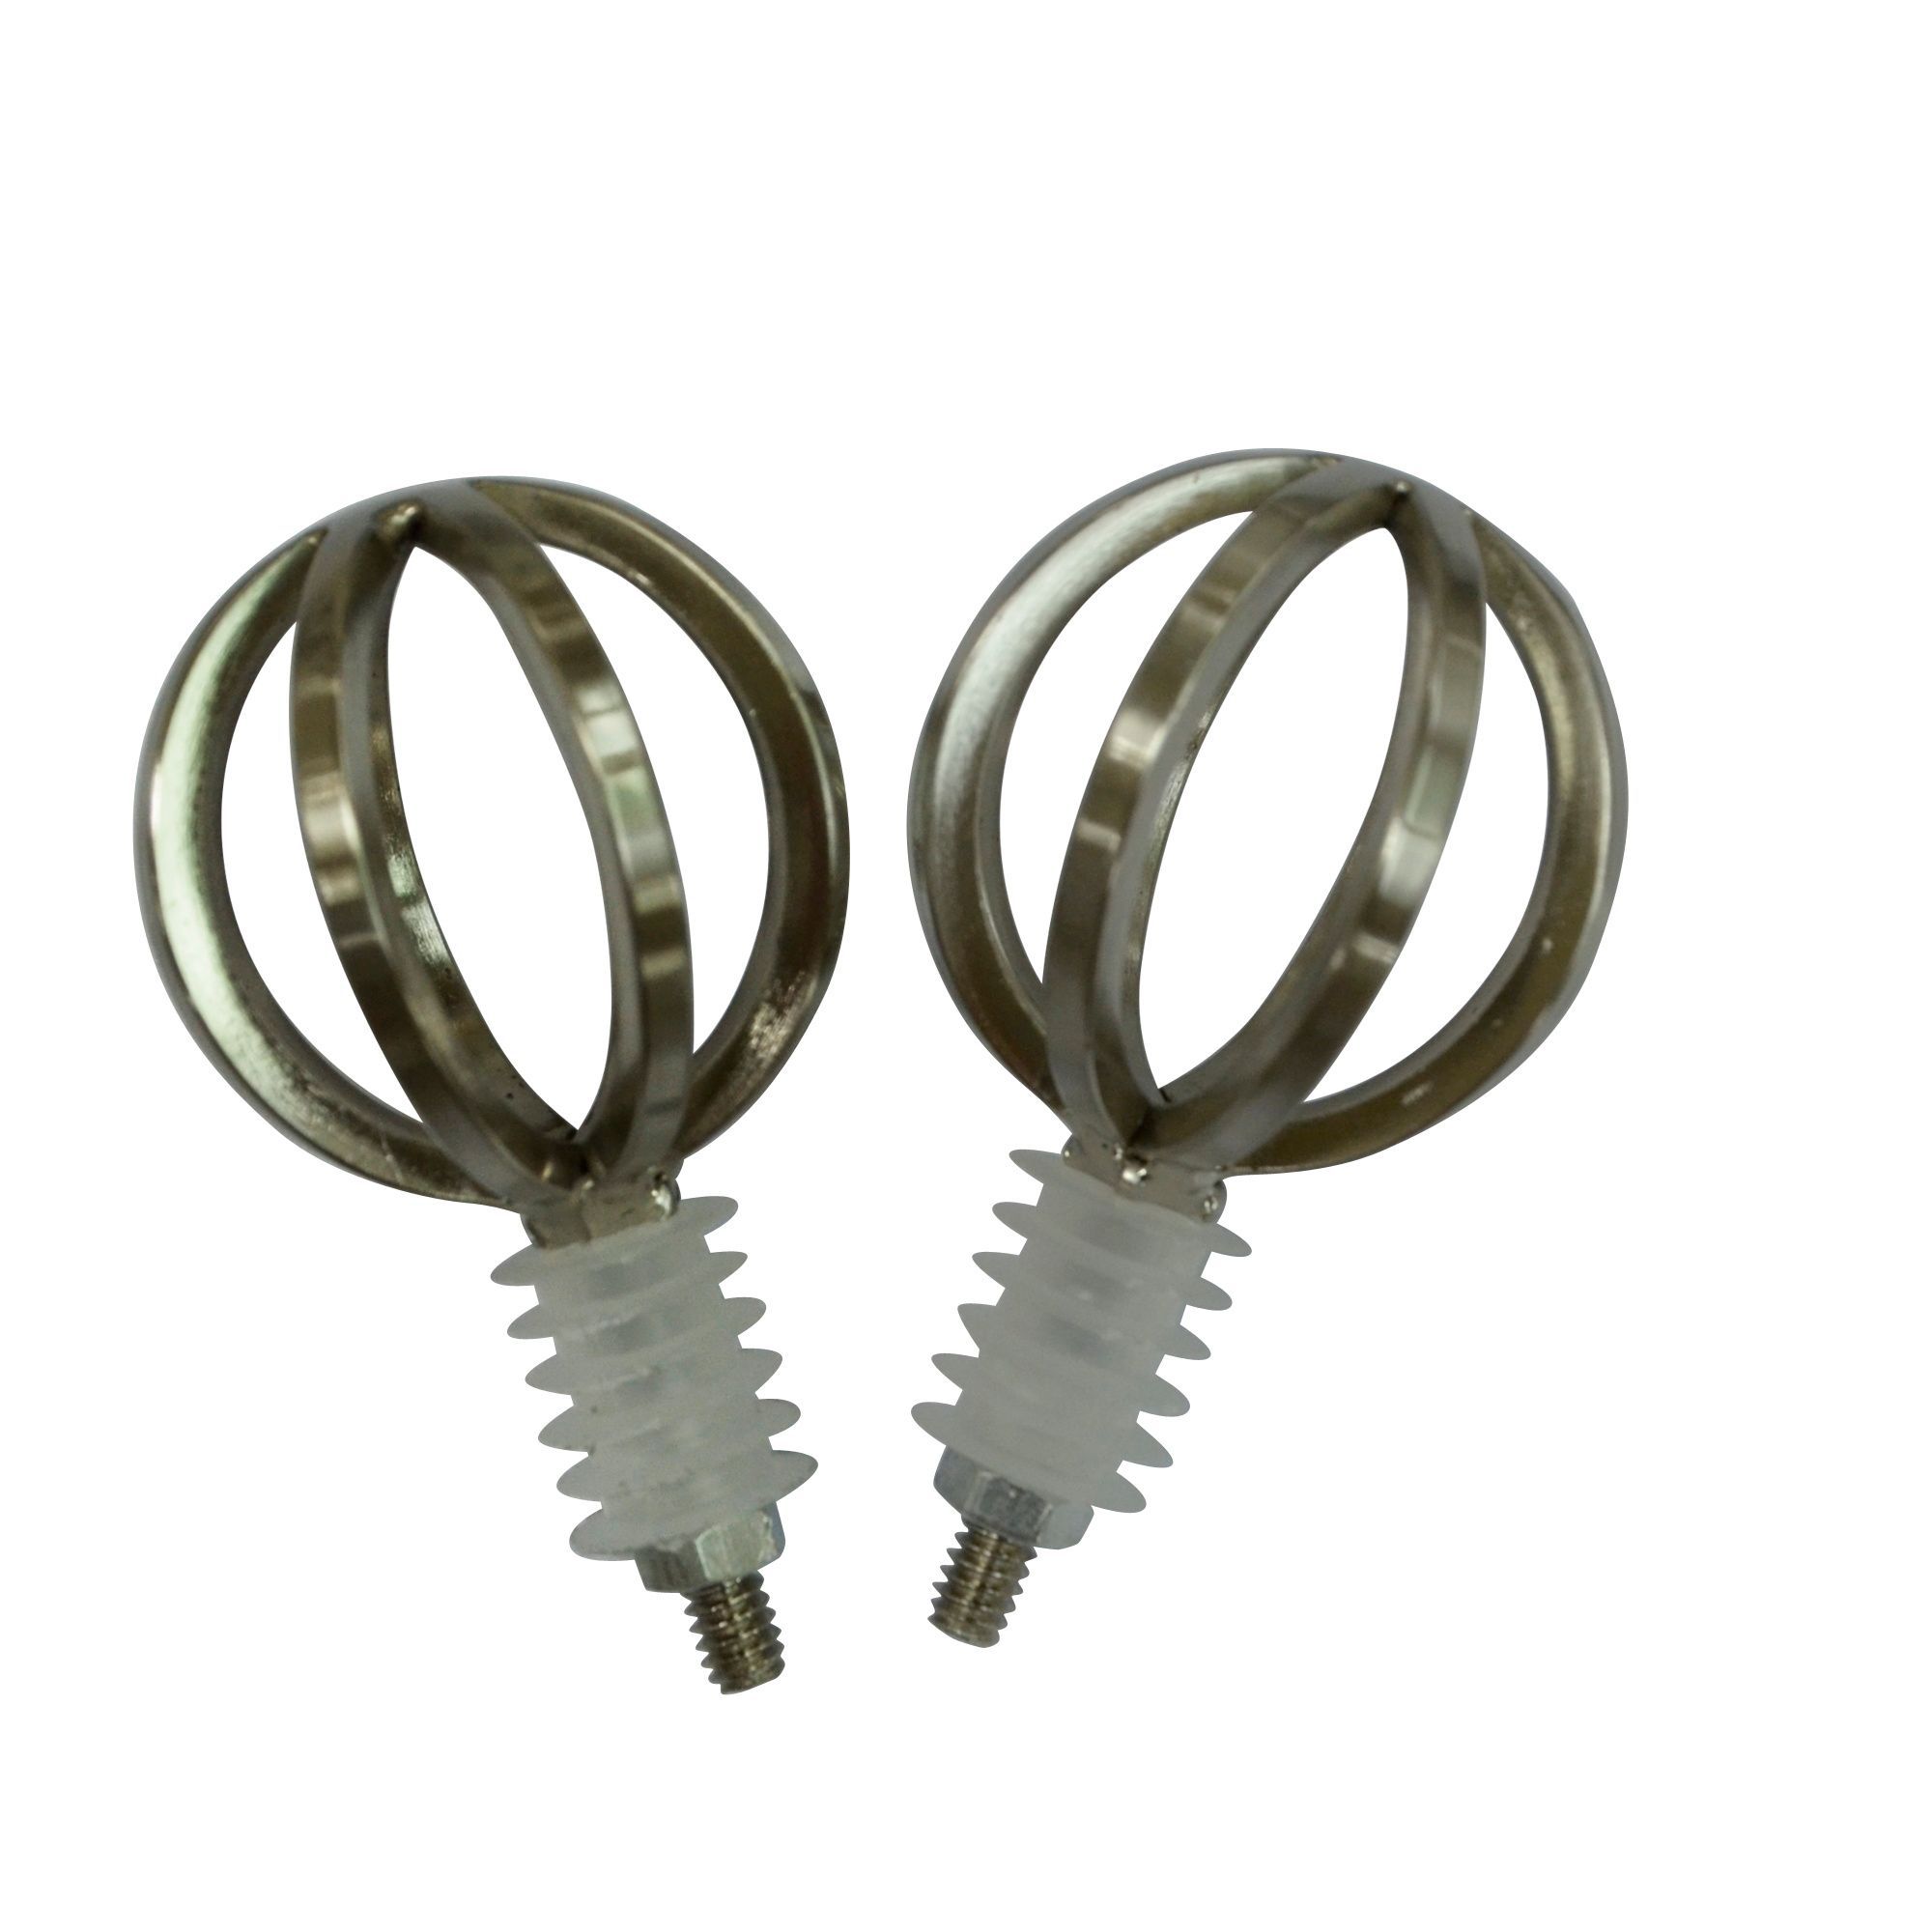 Stainless steel effect Cage ball Curtain pole finial, Pack of 2